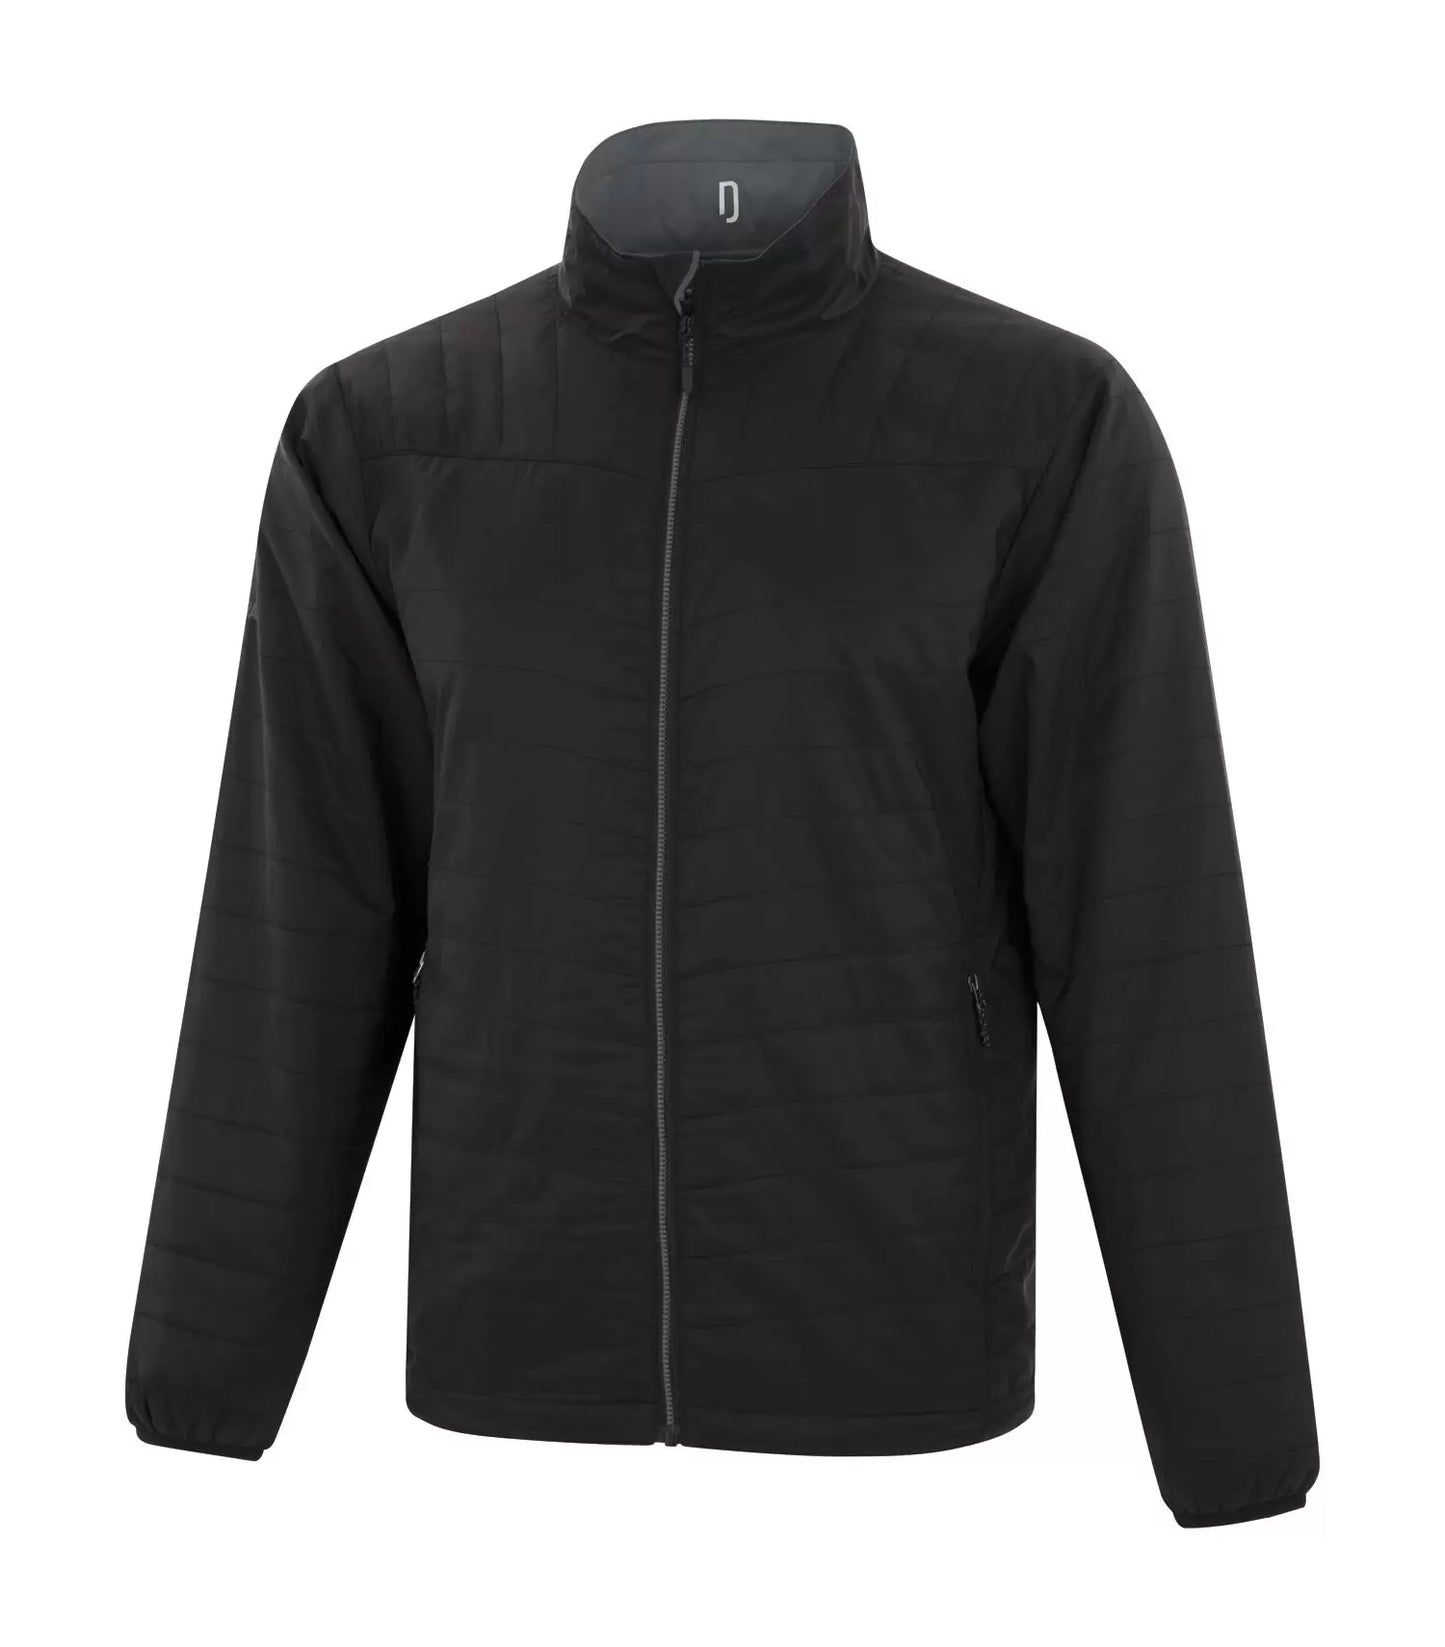 DISCONTINUED DRYFRAME DRY TECH REVERSIBLE LINER JACKET - DF7651